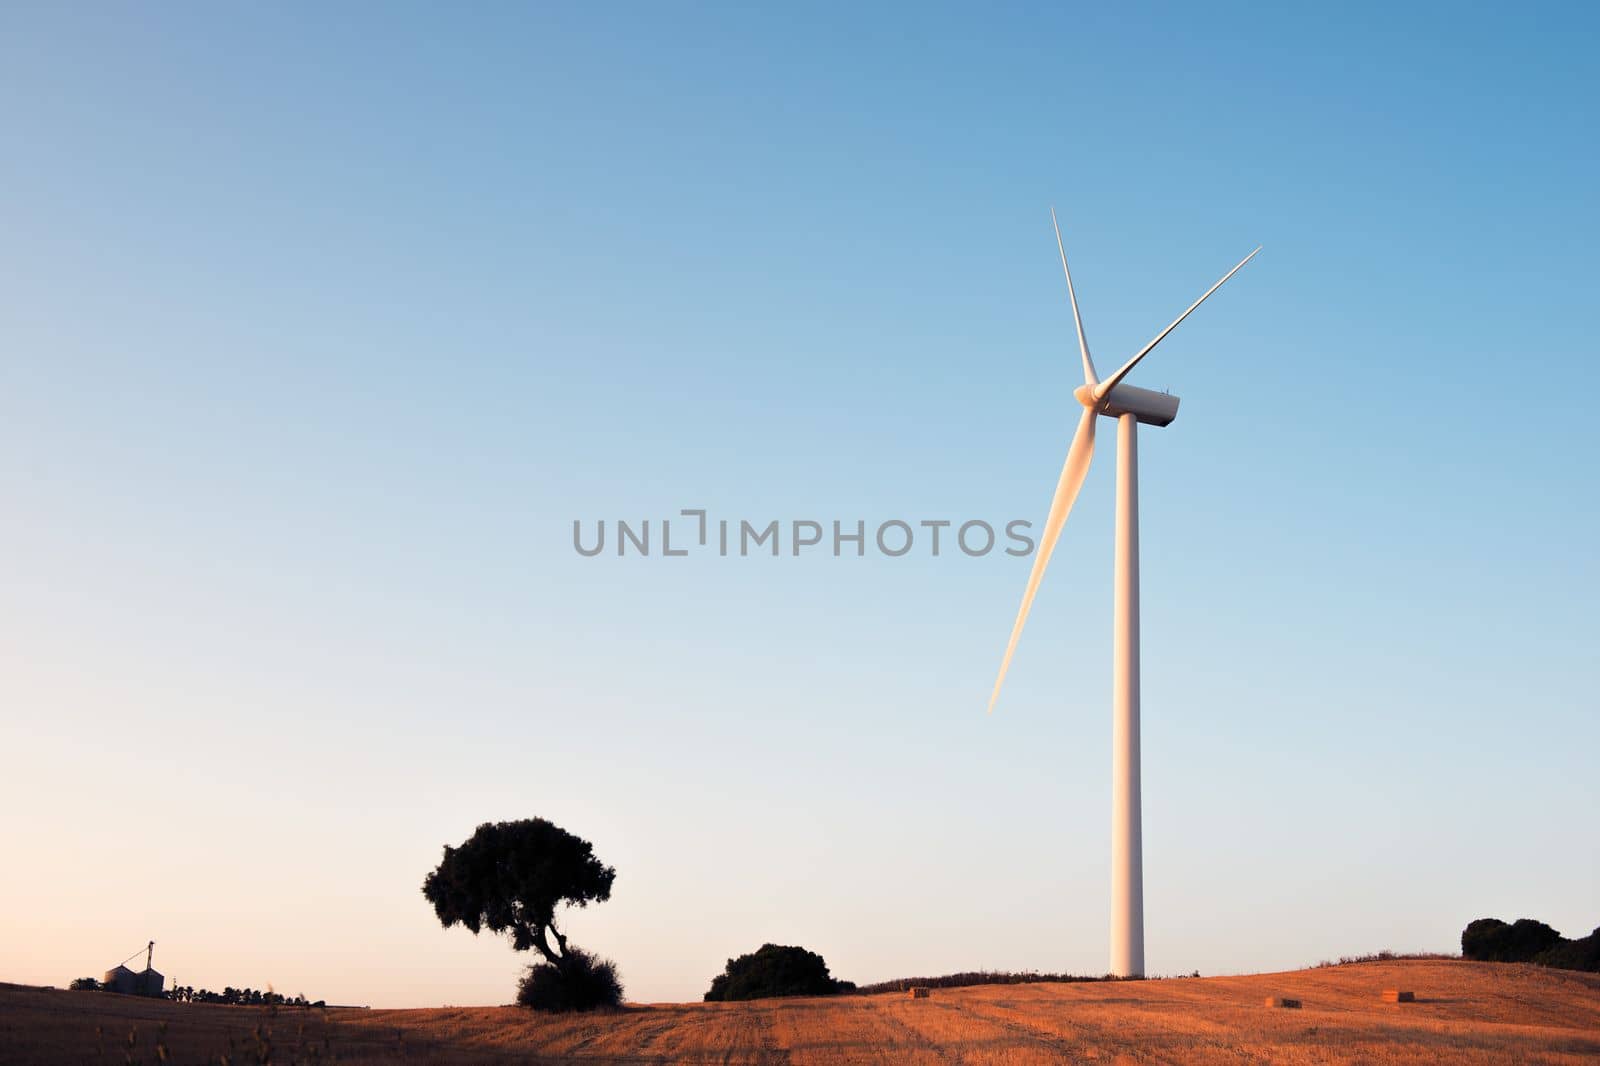 Windmill producing clean energy in a wind farm at sunset. It is in a rural environment surrounded by crops and nature, the sky is clean and clear. Copy space